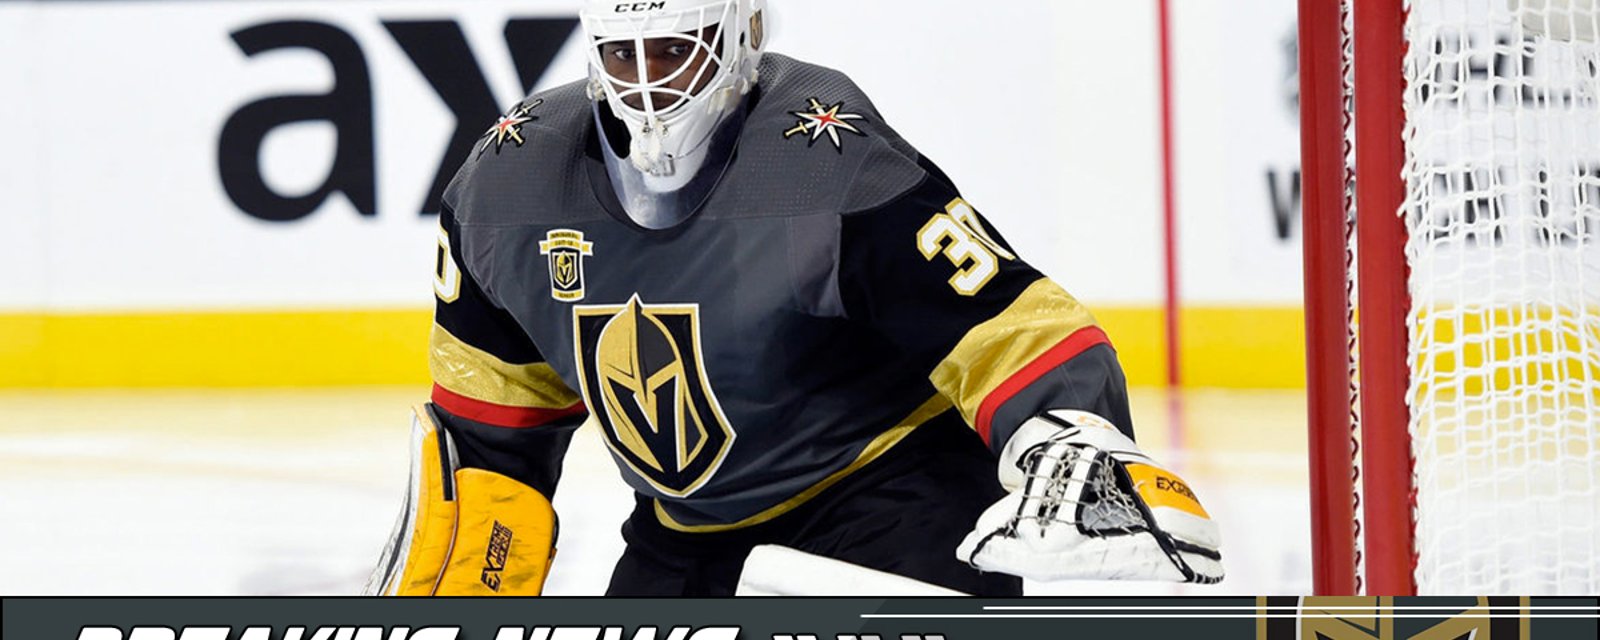 Breaking: Finally some good news for the Golden Knights!